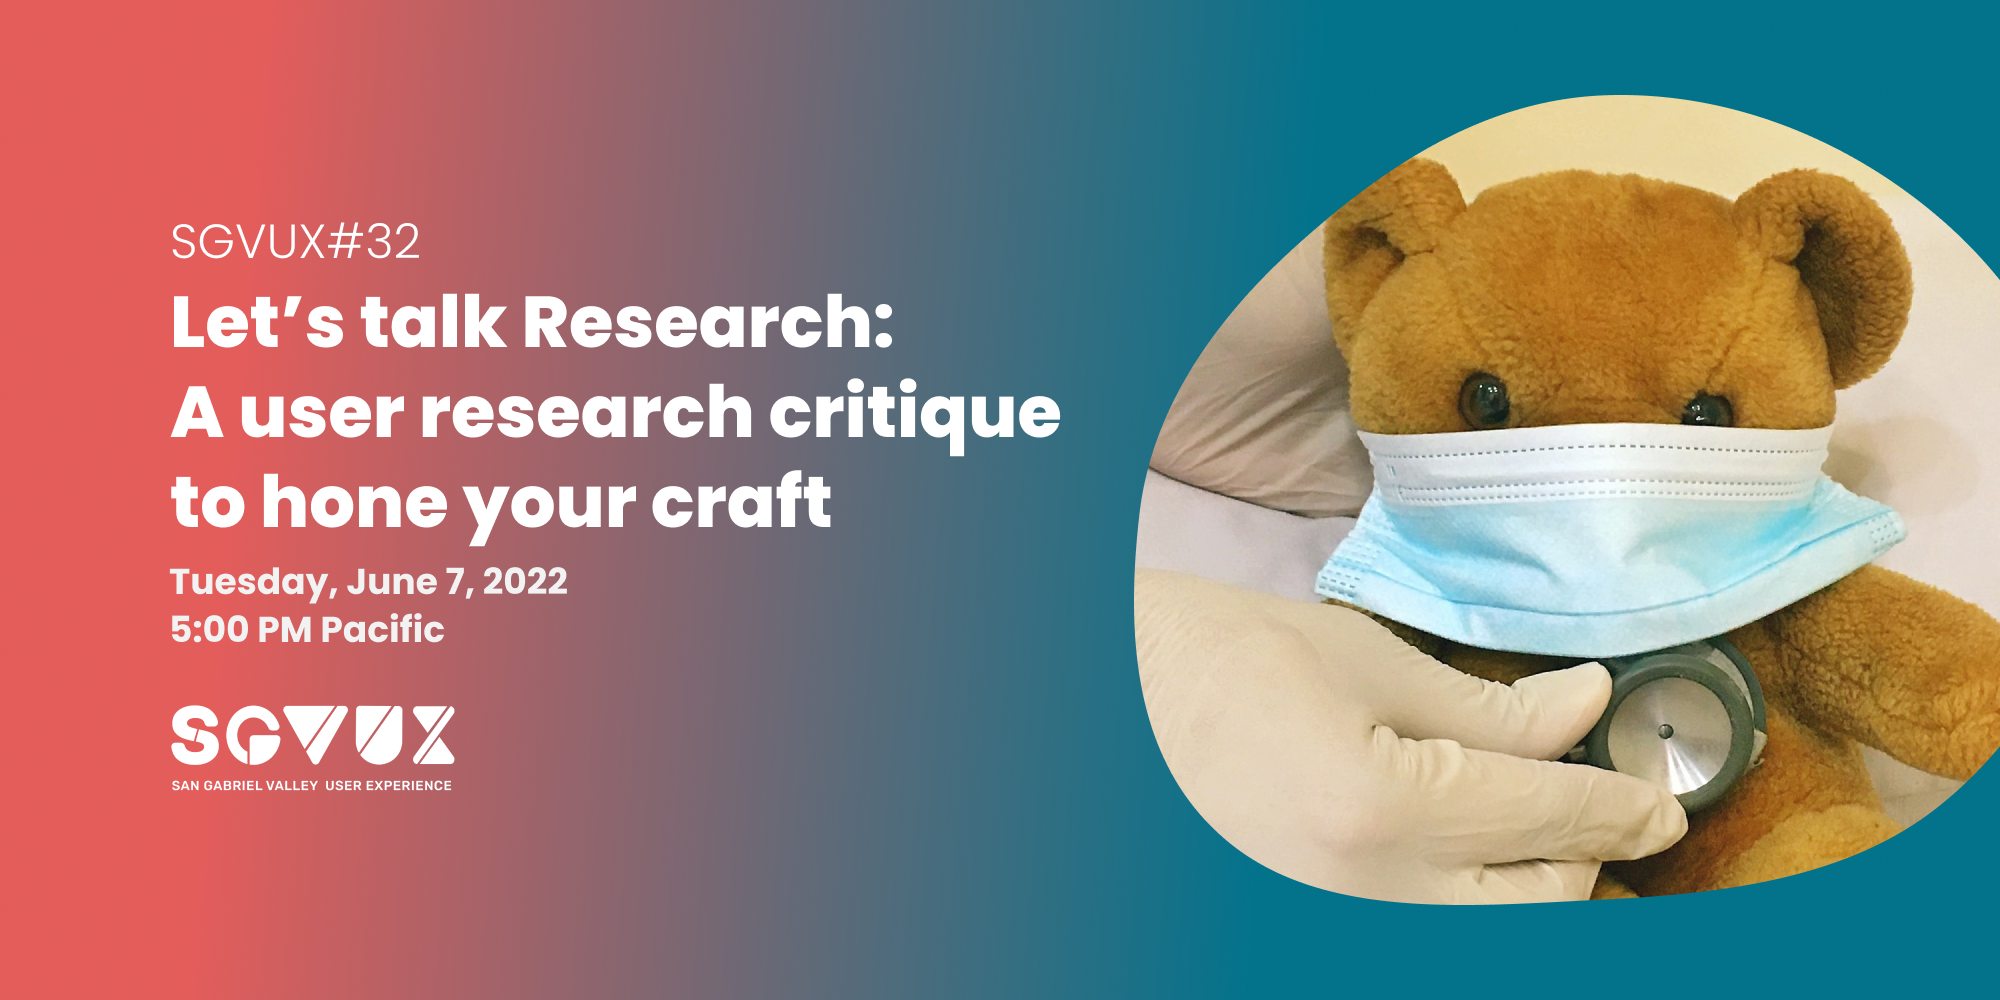 A stuffed animal receives care from a healthcare provider as a metaphor for diagnosing one's skills at their craft.